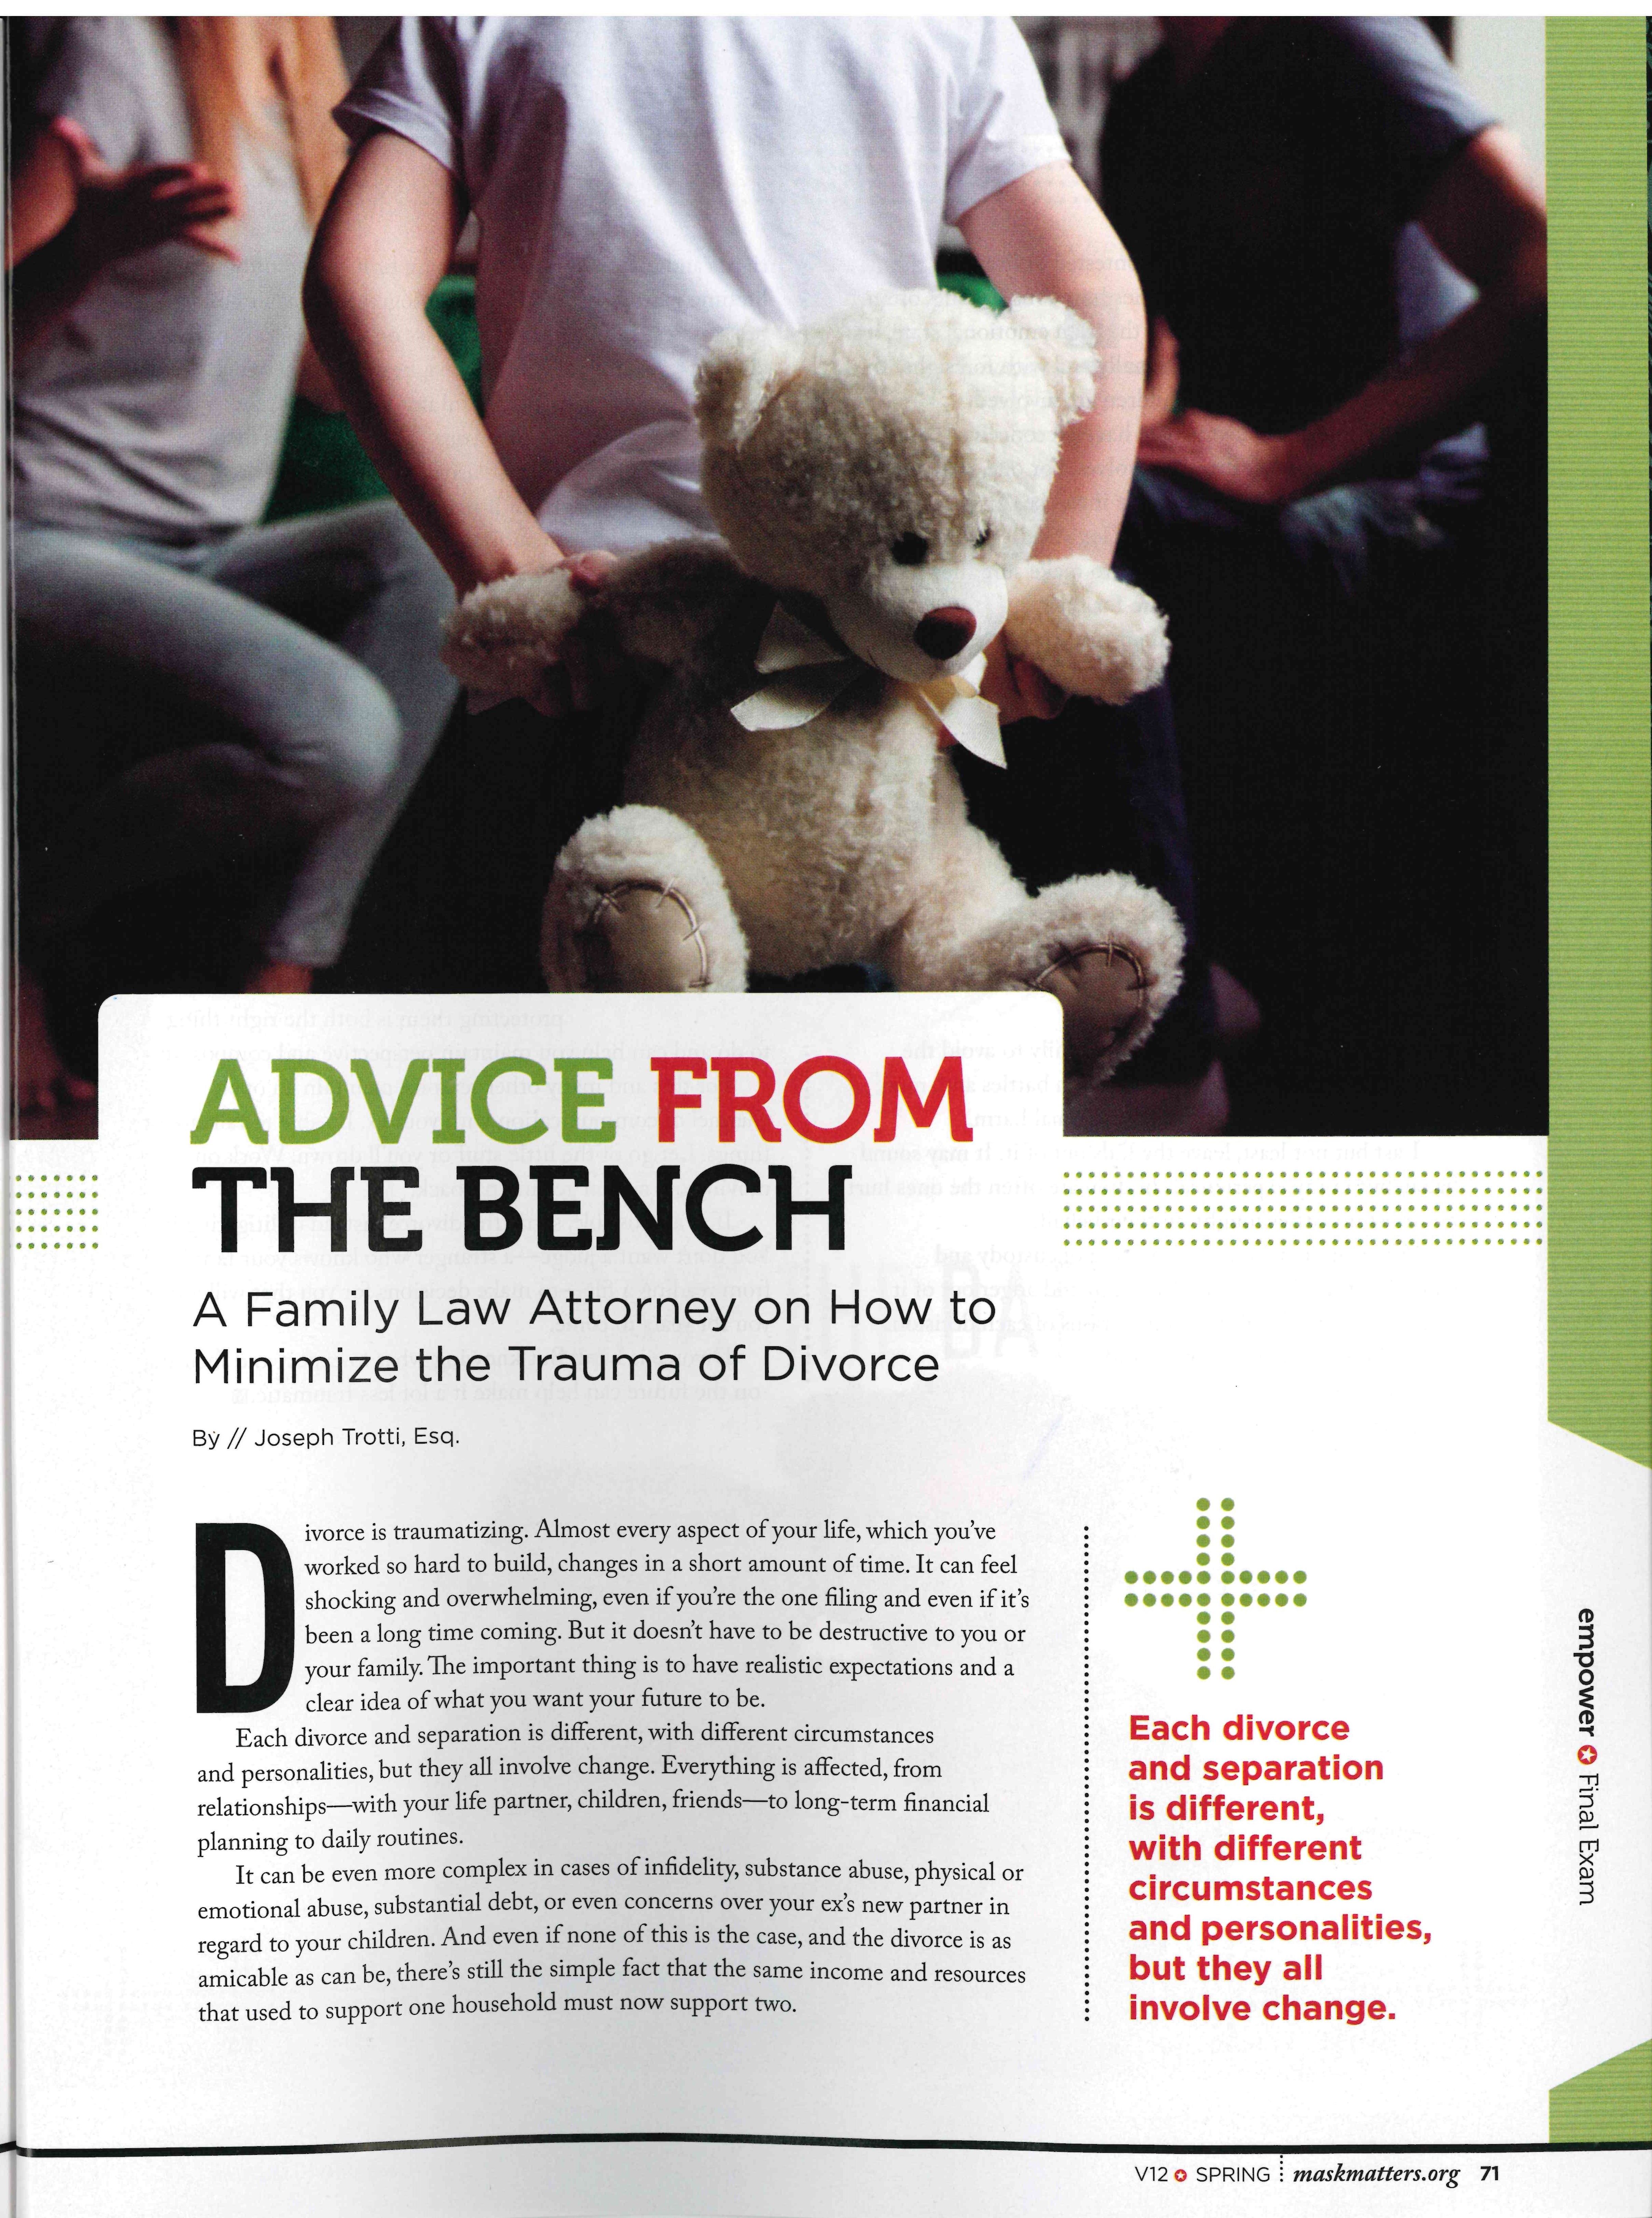 Advice From the Bench Article